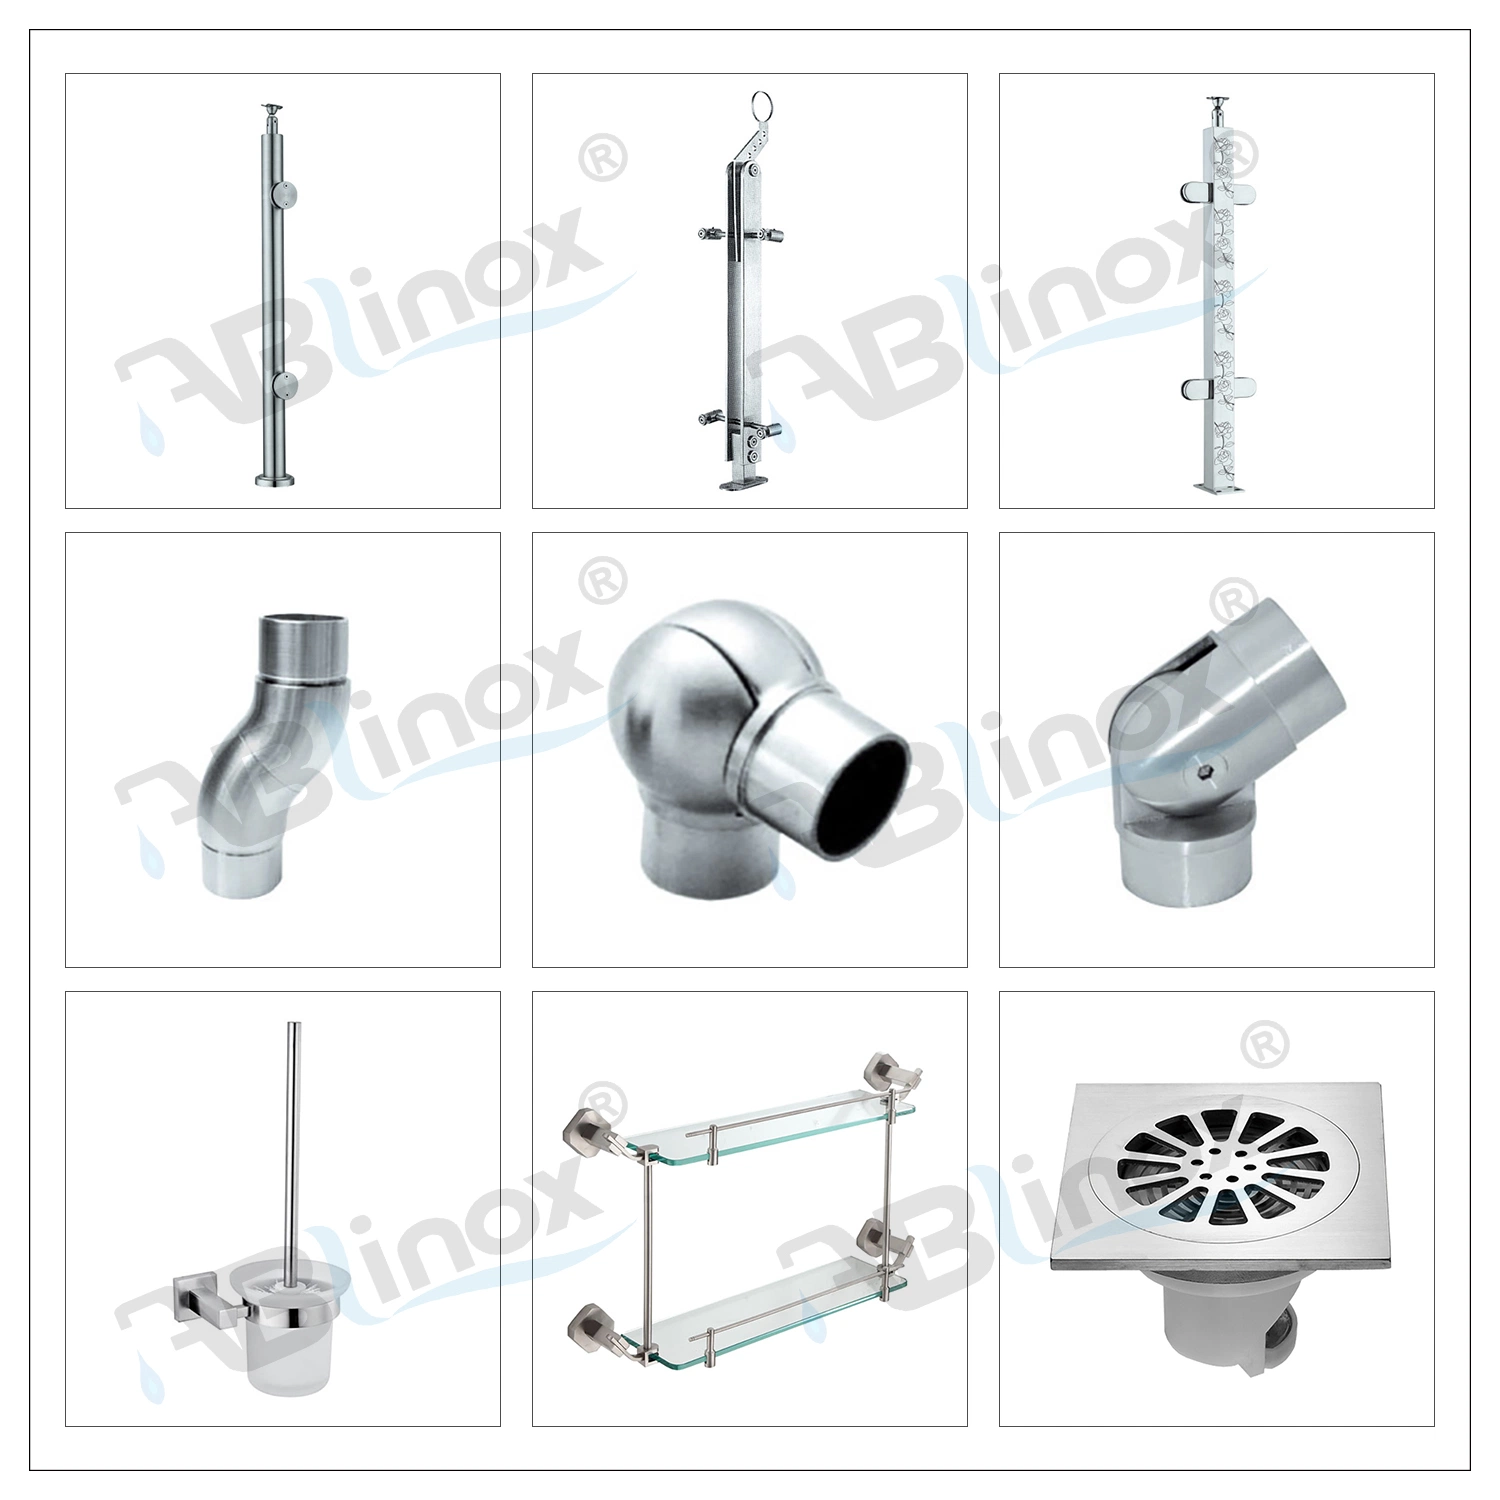 Stainless Steel Handrail Design for Stairs Wall Bracket for Handrail